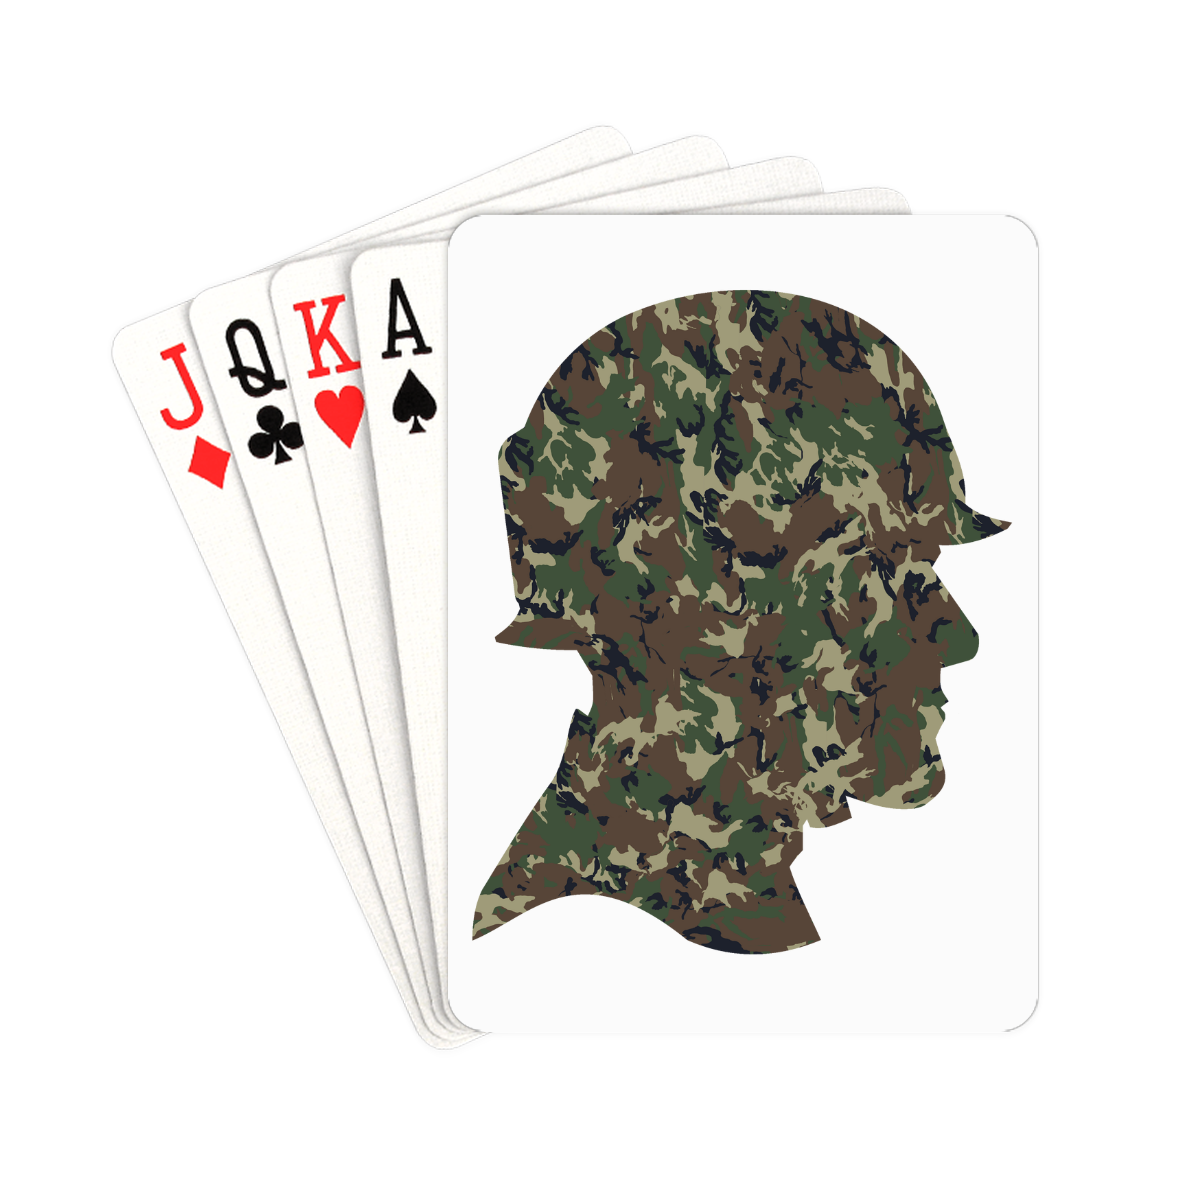 Forest Camouflage Soldier Playing Cards 2.5"x3.5"